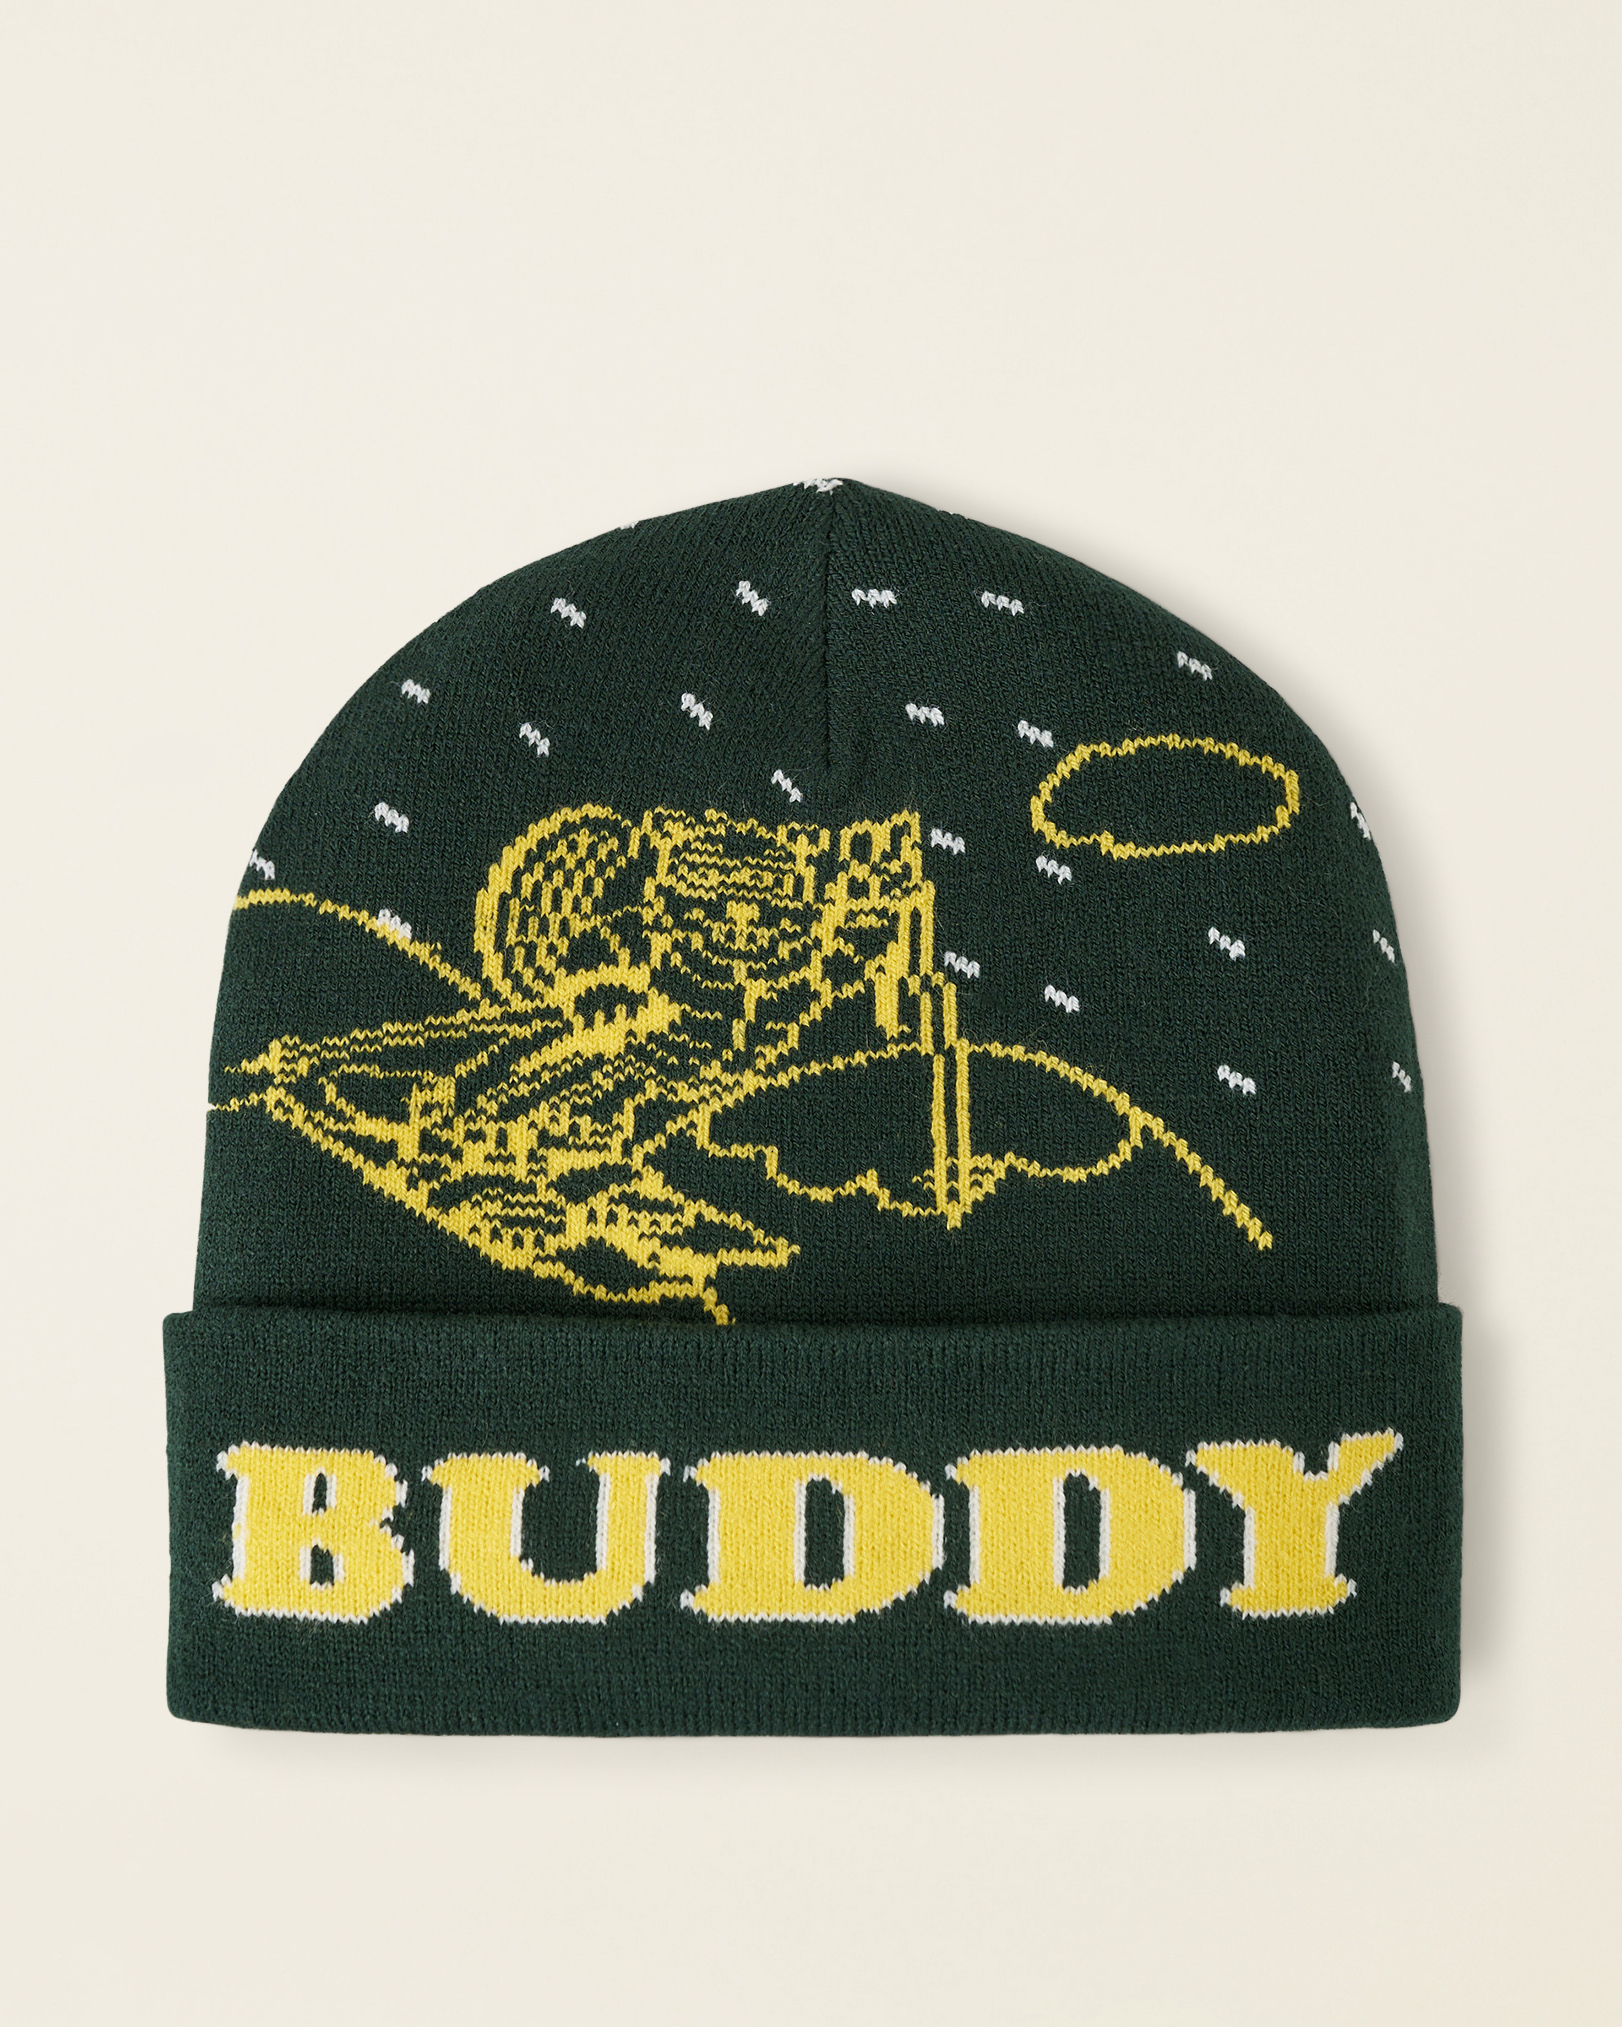 Roots Buddy Toque Hat in Varsity Green